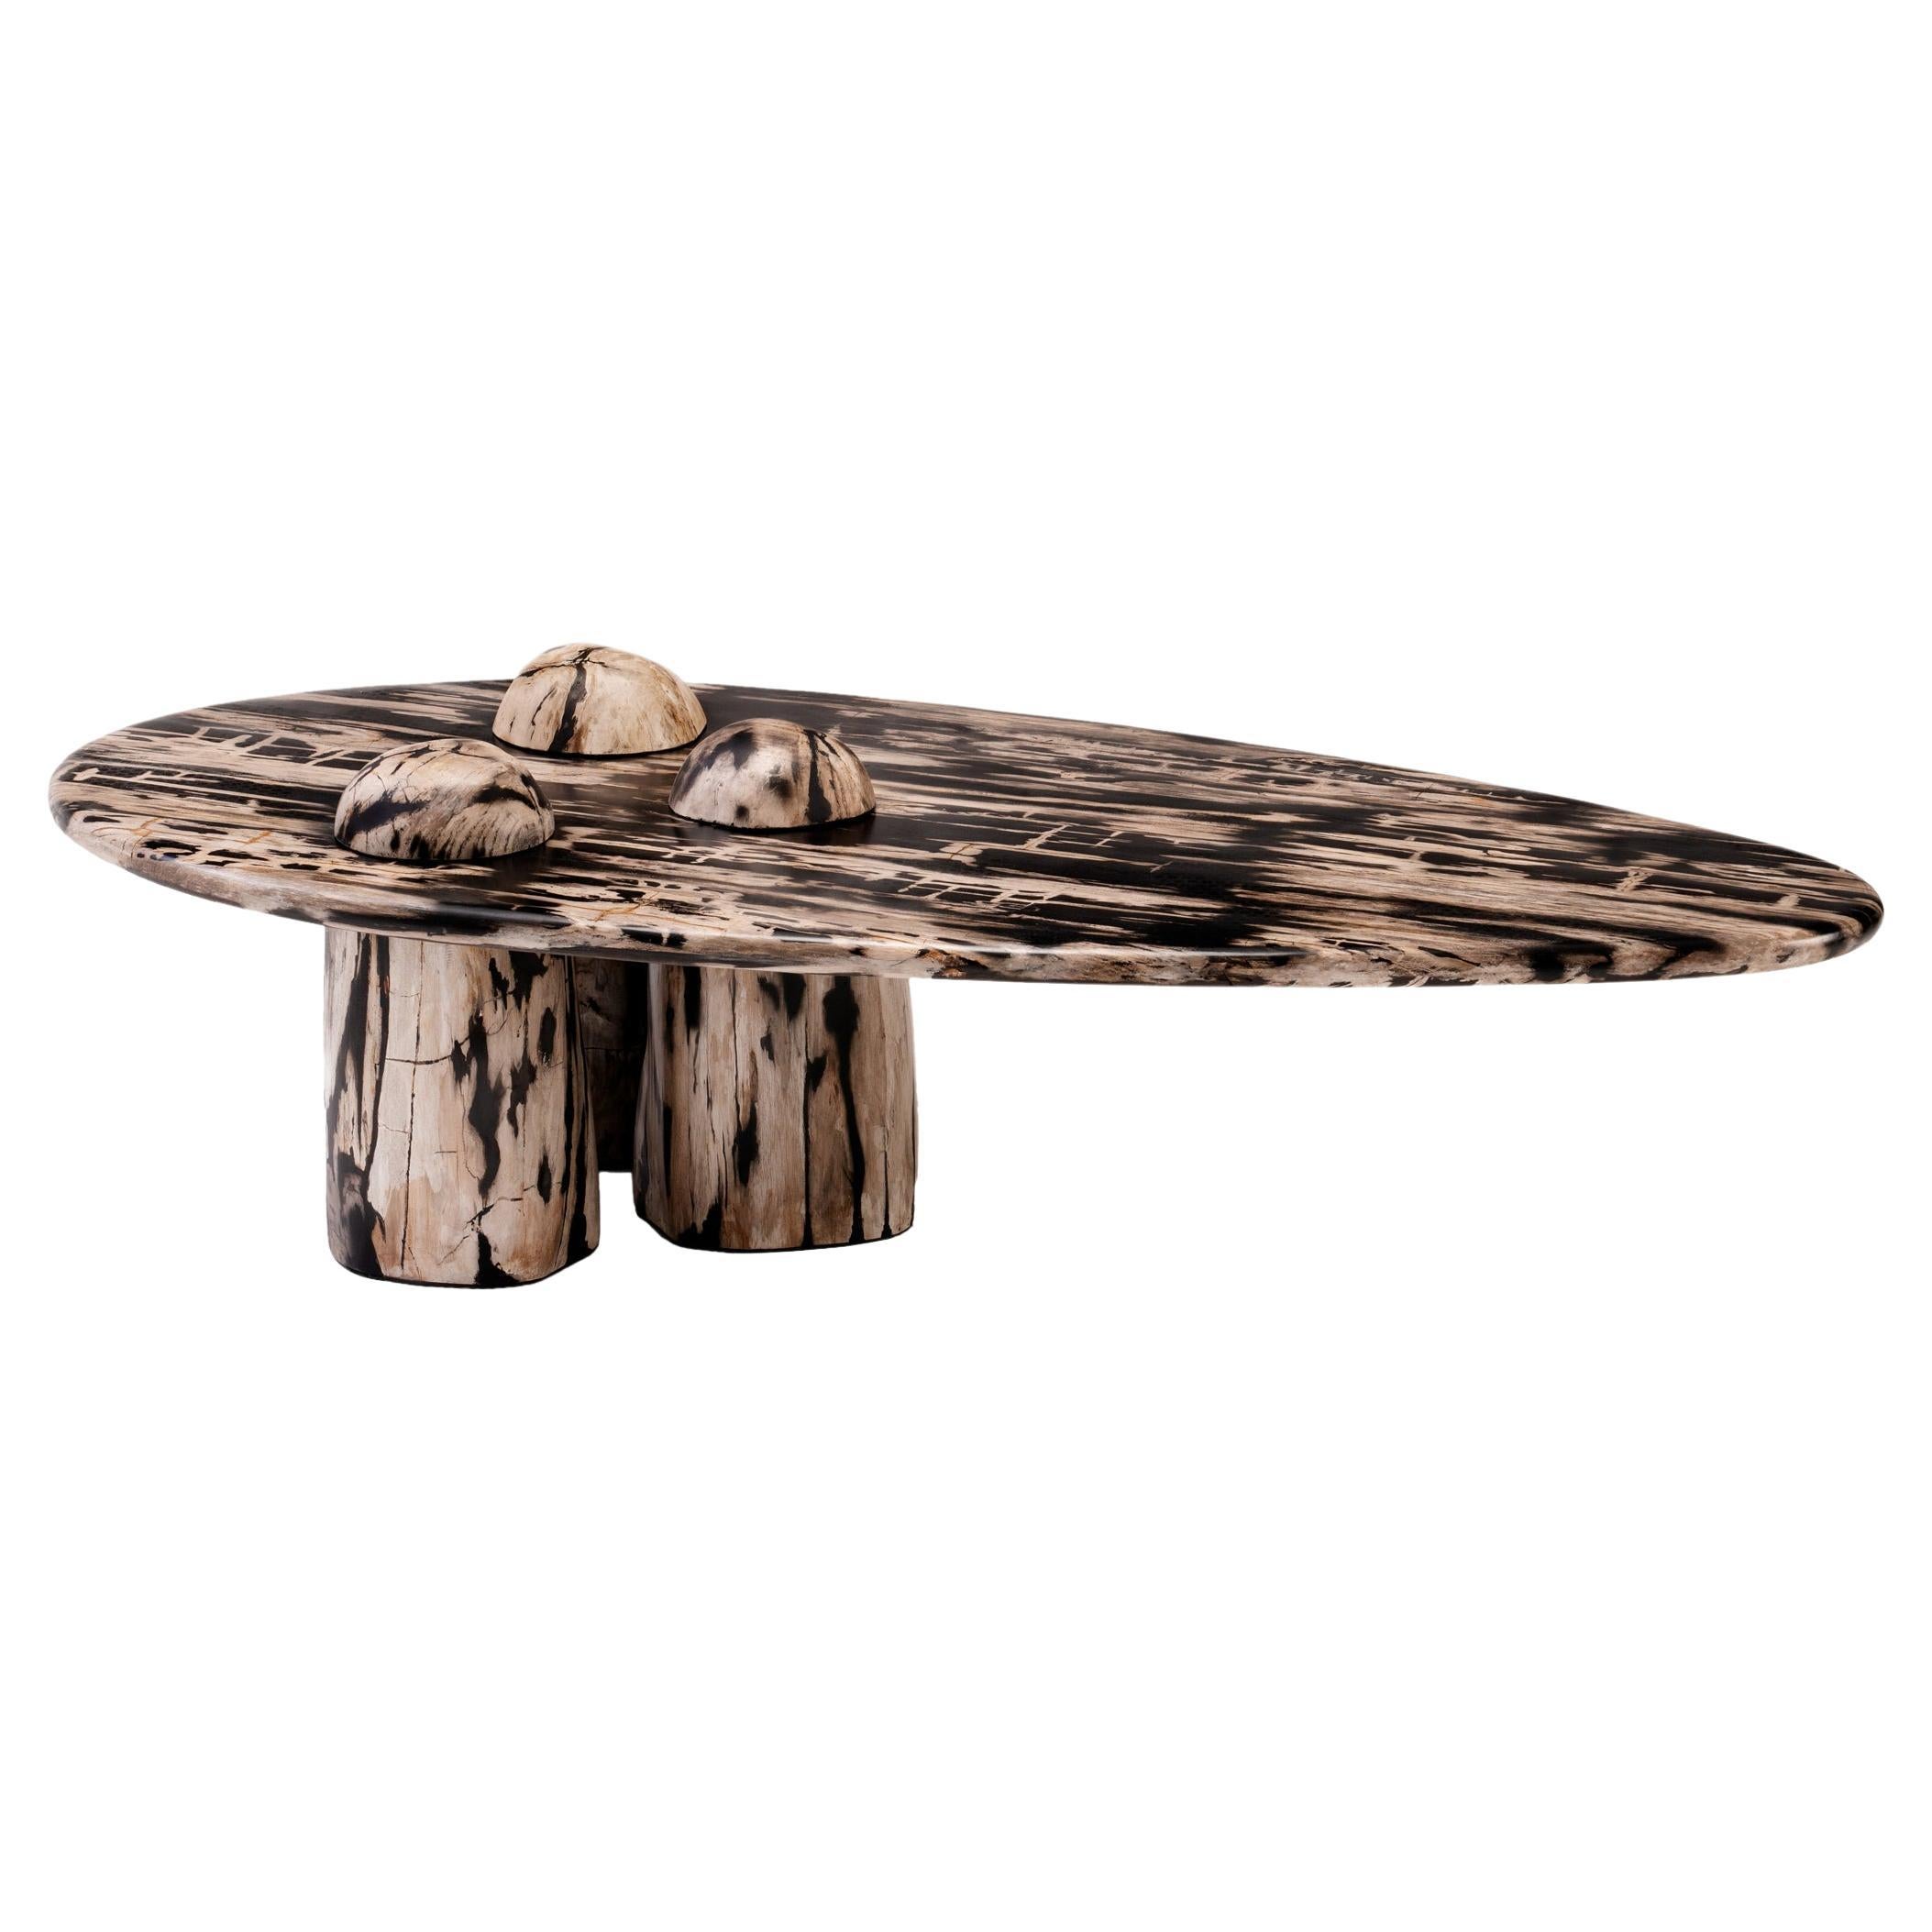 Rocky Montage • Sculptural Petrified Wood Coffee Table by Odditi